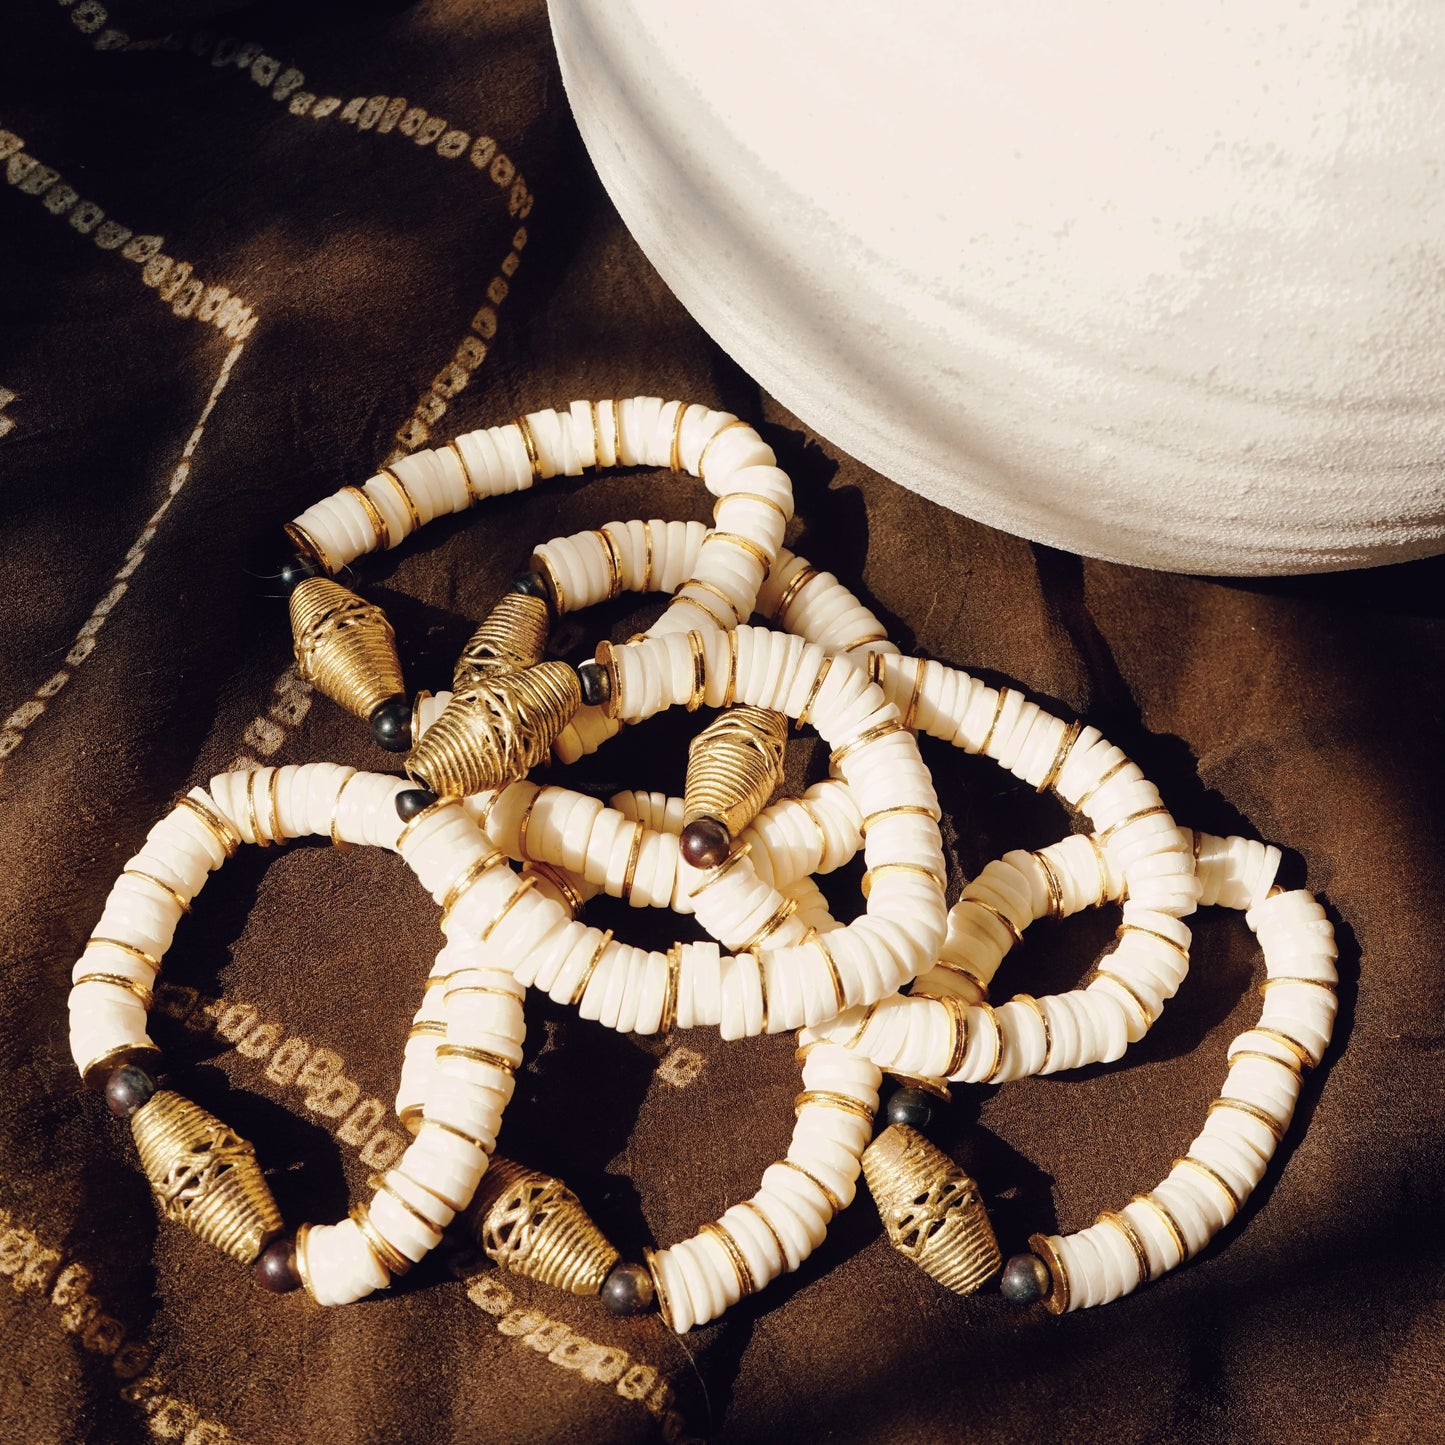 Multiple pearl shelled bracelets with gold pendants stacked on top of each other